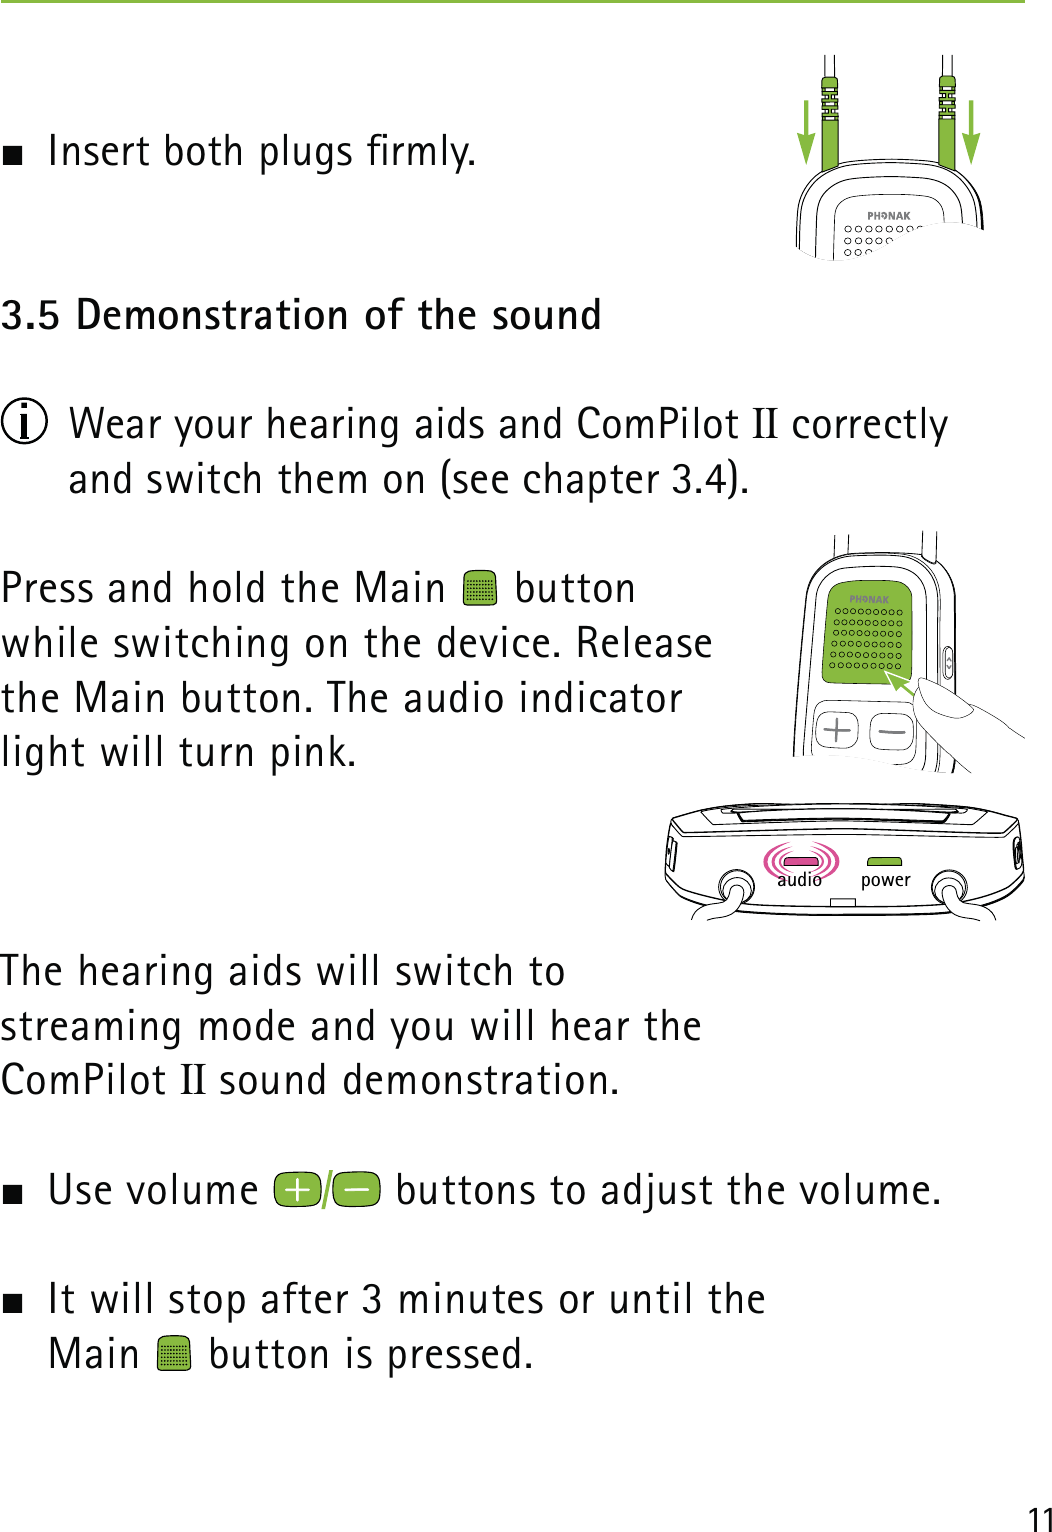 11  Insert both plugs rmly.3.5 Demonstration of the sound   Wear your hearing aids and ComPilot II correctly and switch them on (see chapter 3.4).Press and hold the Main   button  while switching on the device. Release the Main button. The audio indicator light will turn pink.The hearing aids will switch to  streaming mode and you will hear the  ComPilot II sound demonstration.   Use volume   buttons to adjust the volume.   It will stop after 3 minutes or until the  Main   button is pressed.poweraudio